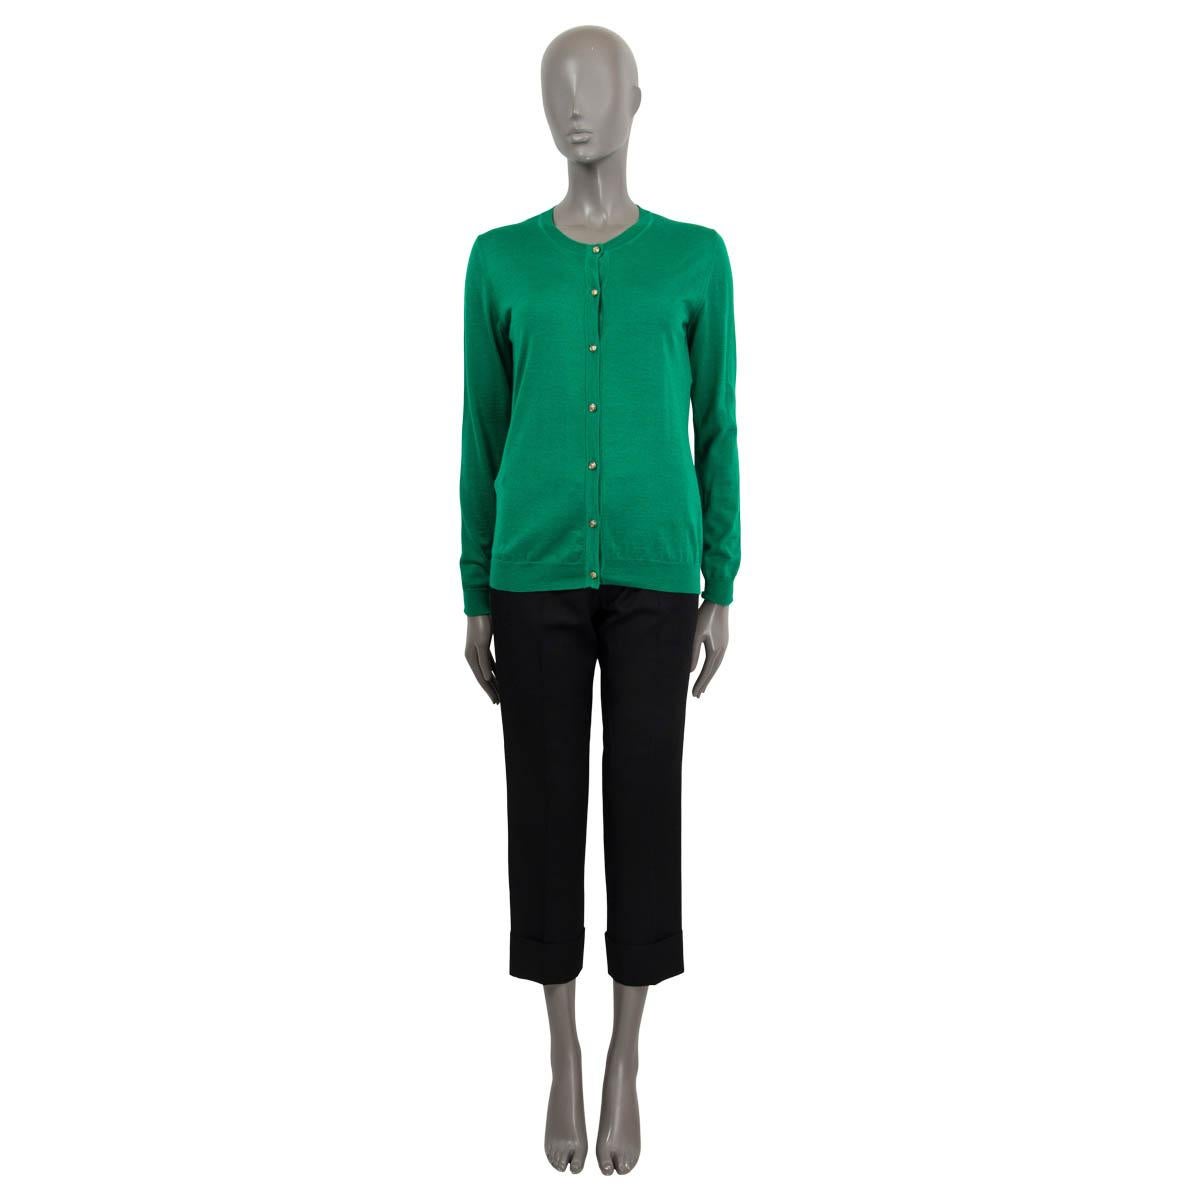 100% authentic Versace round-neck fine-knit cardigan in green cashmere (70%) and silk (30%). Features are gold-ton medusa buttons. Has been worn and is in excellent condition.

Measurements
Tag Size	44
Size	L
Shoulder Width	41cm (16in)
Bust